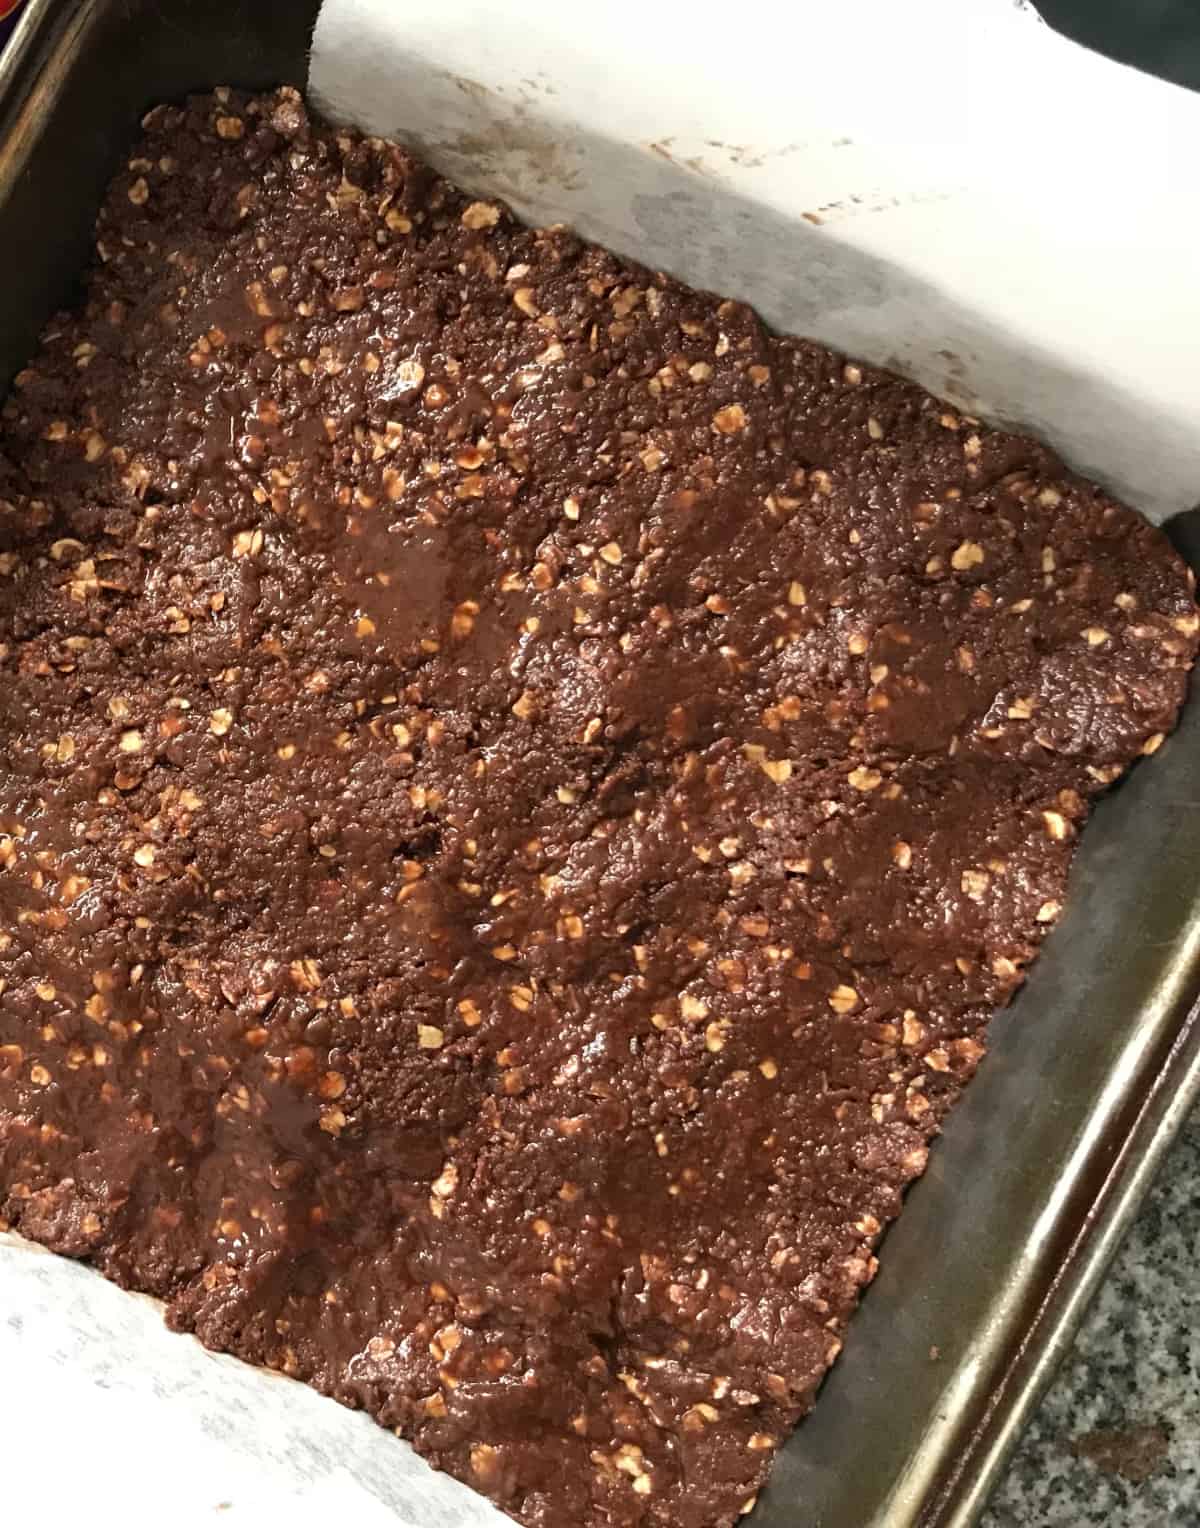 Raw mixture of chocolate and oat pressed onto metal pan with parchment paper.